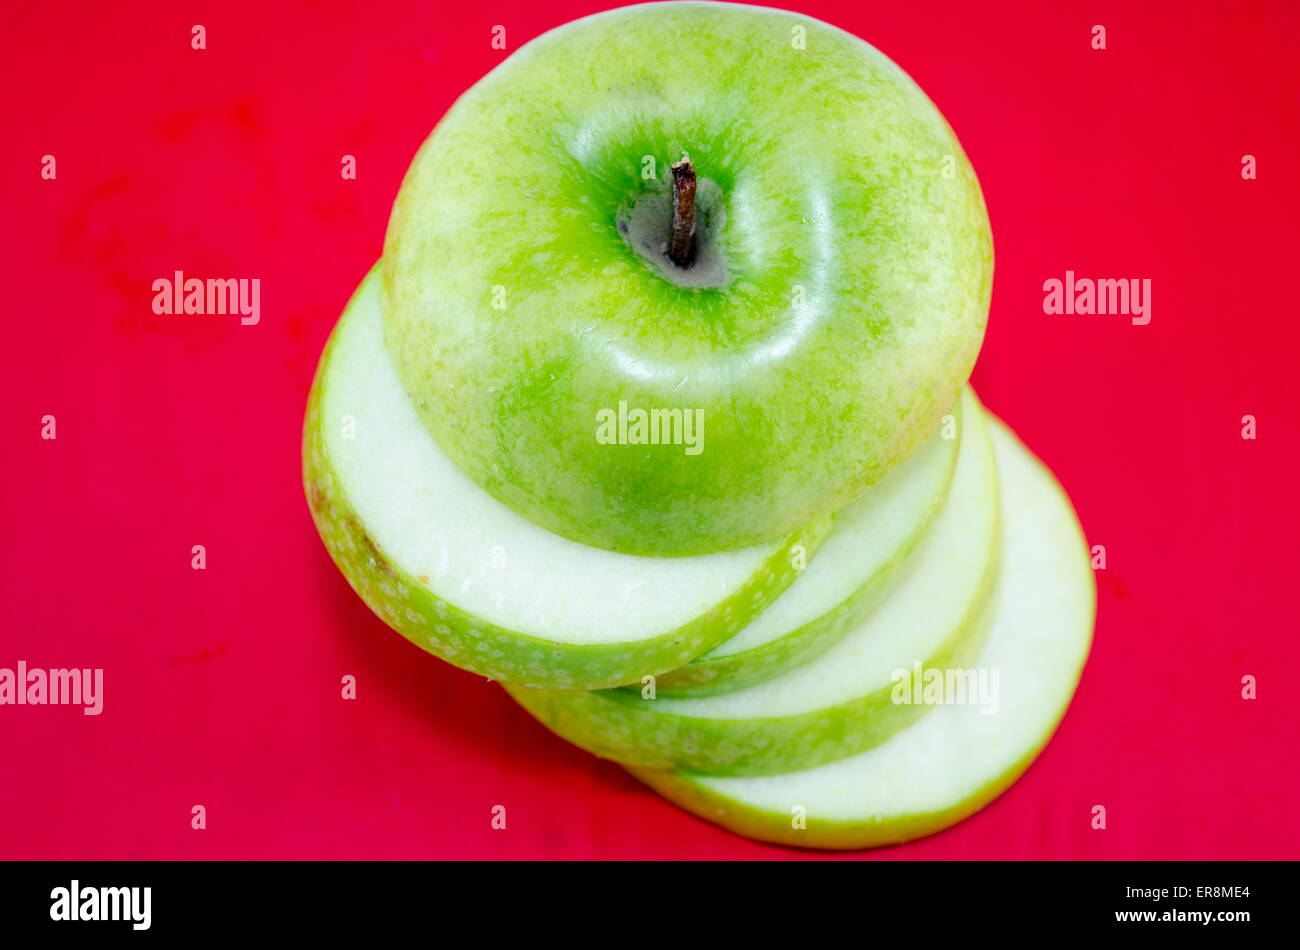 Apple sliced in thin pieces against a red background Stock Photo